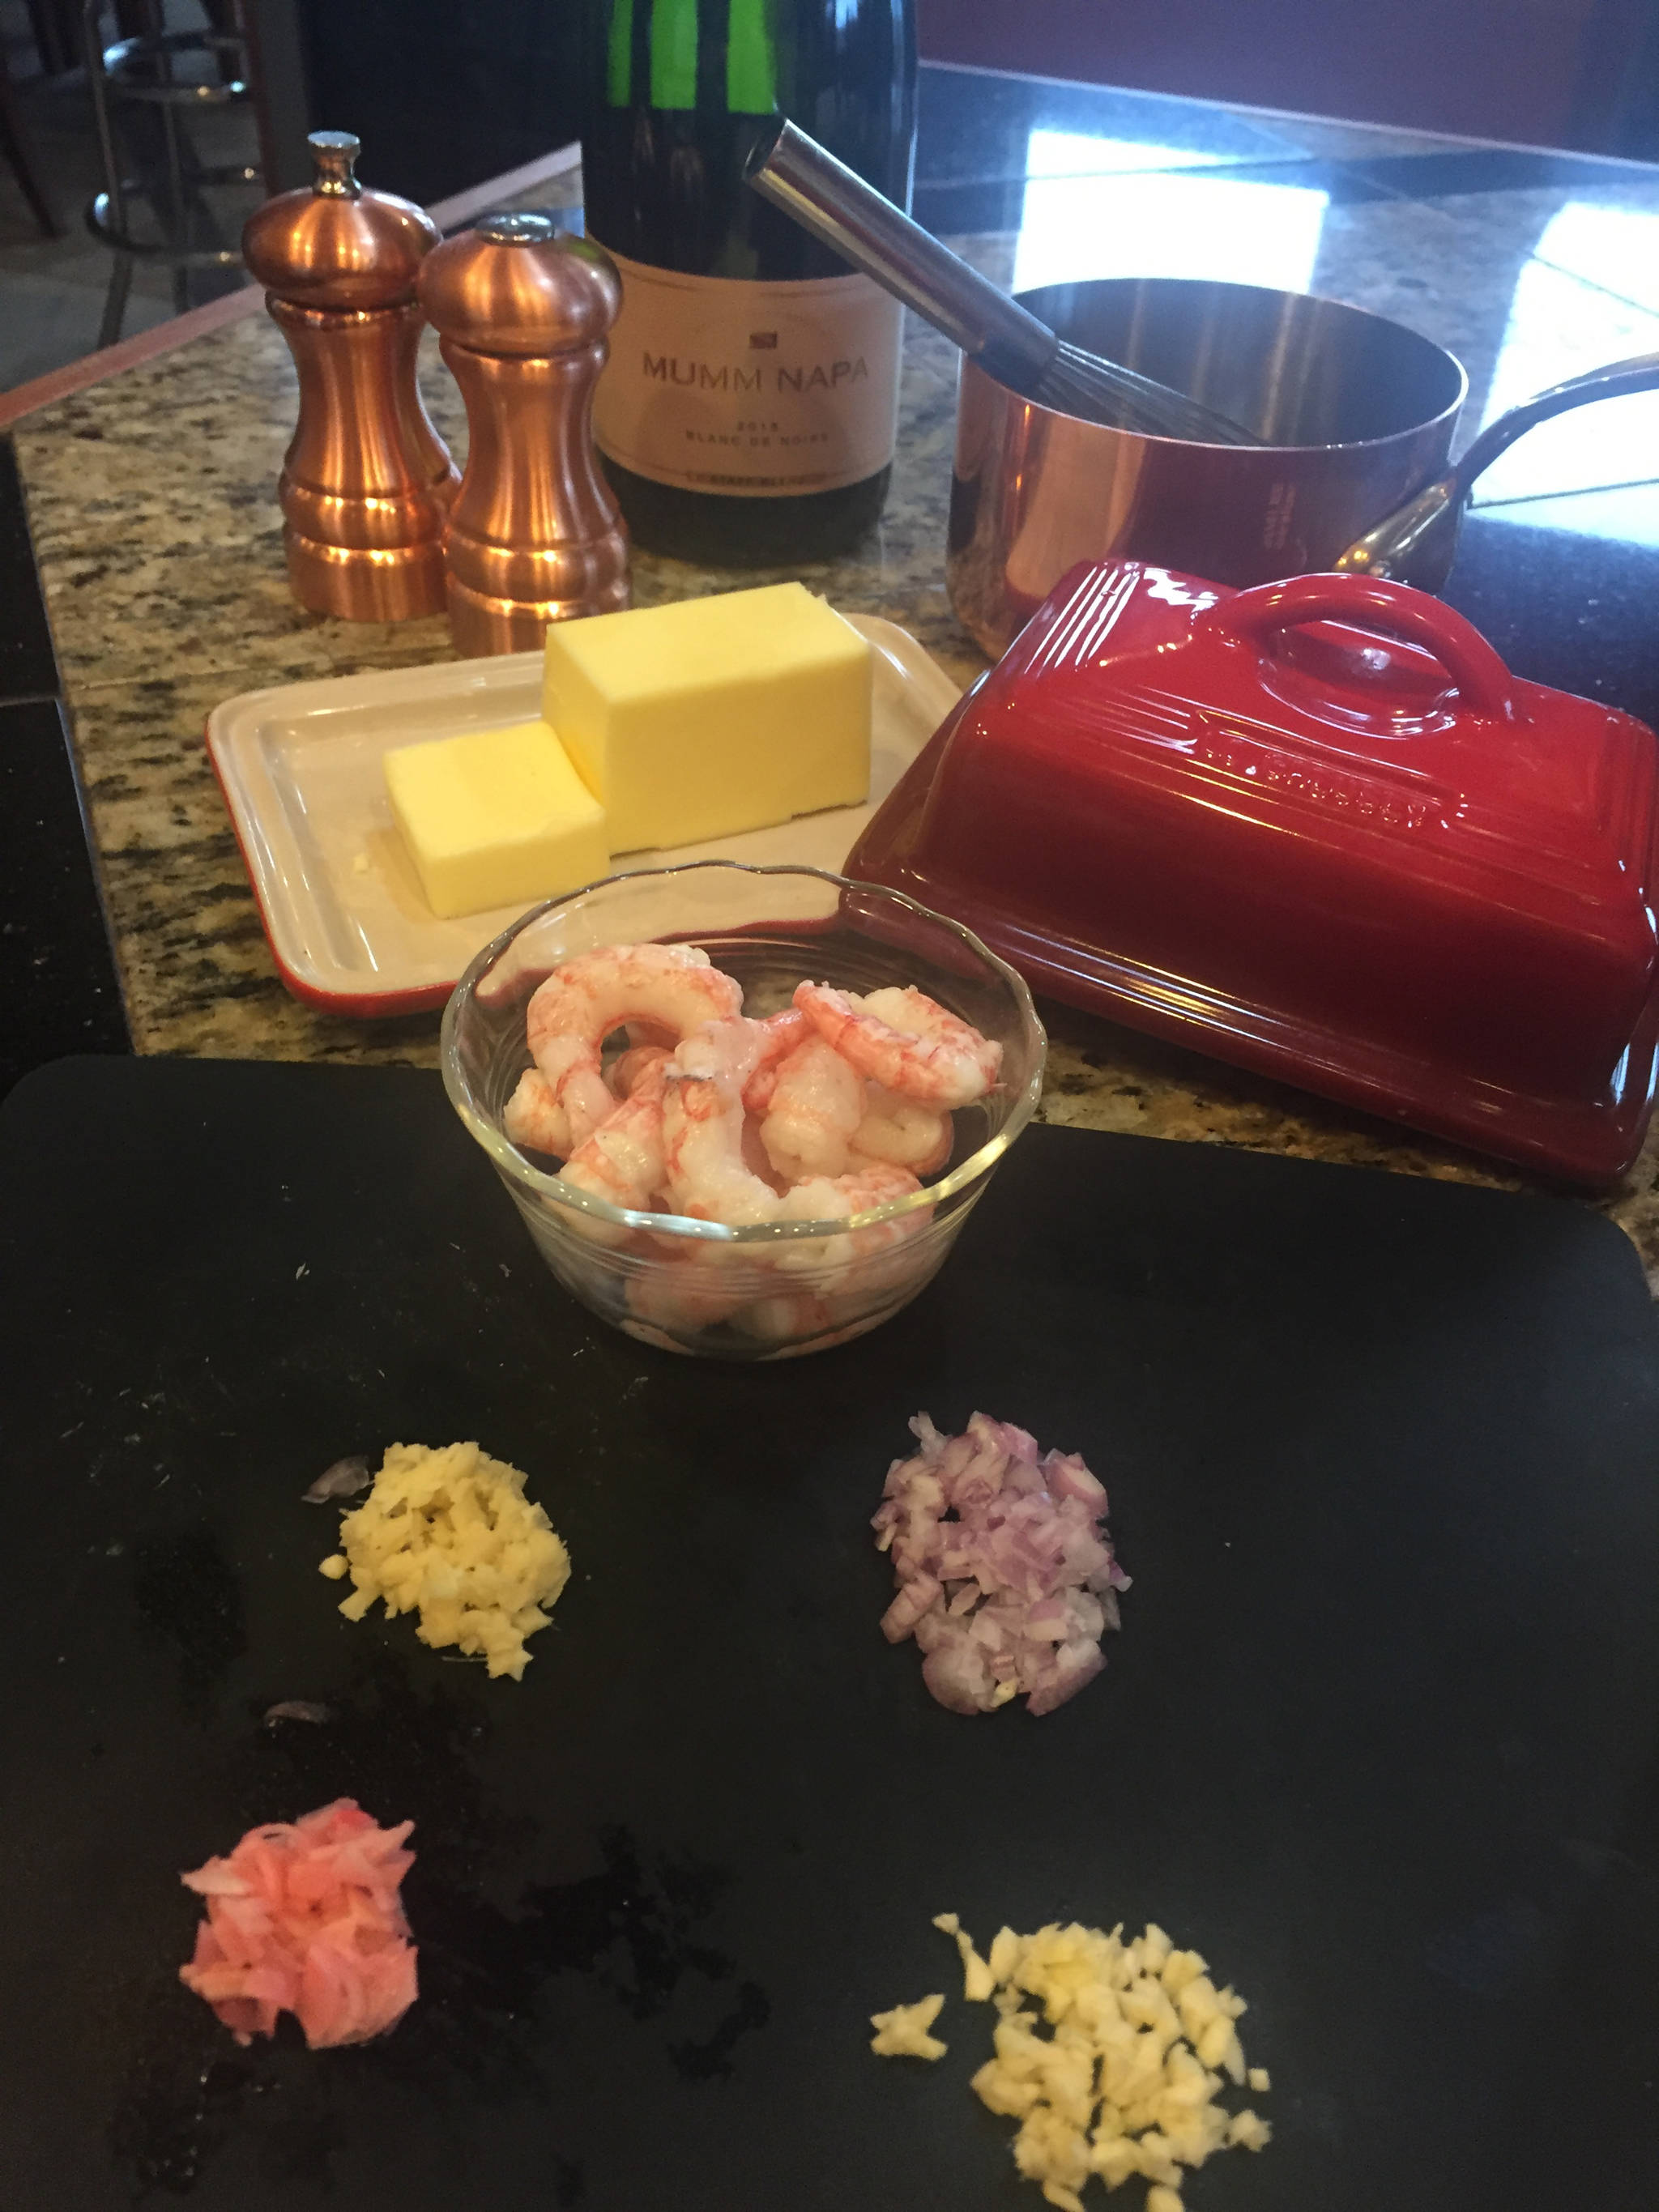 Prince William Sound Spot Shrimp with Champagne Ginger Butter Sauce is the perfect recipe to start off the traditional start of summer, as seen here with the ingredients in Teri Robl’s kitchen on May 28, 2019, in Homer, Alaska. (Photo by Teri Robl)